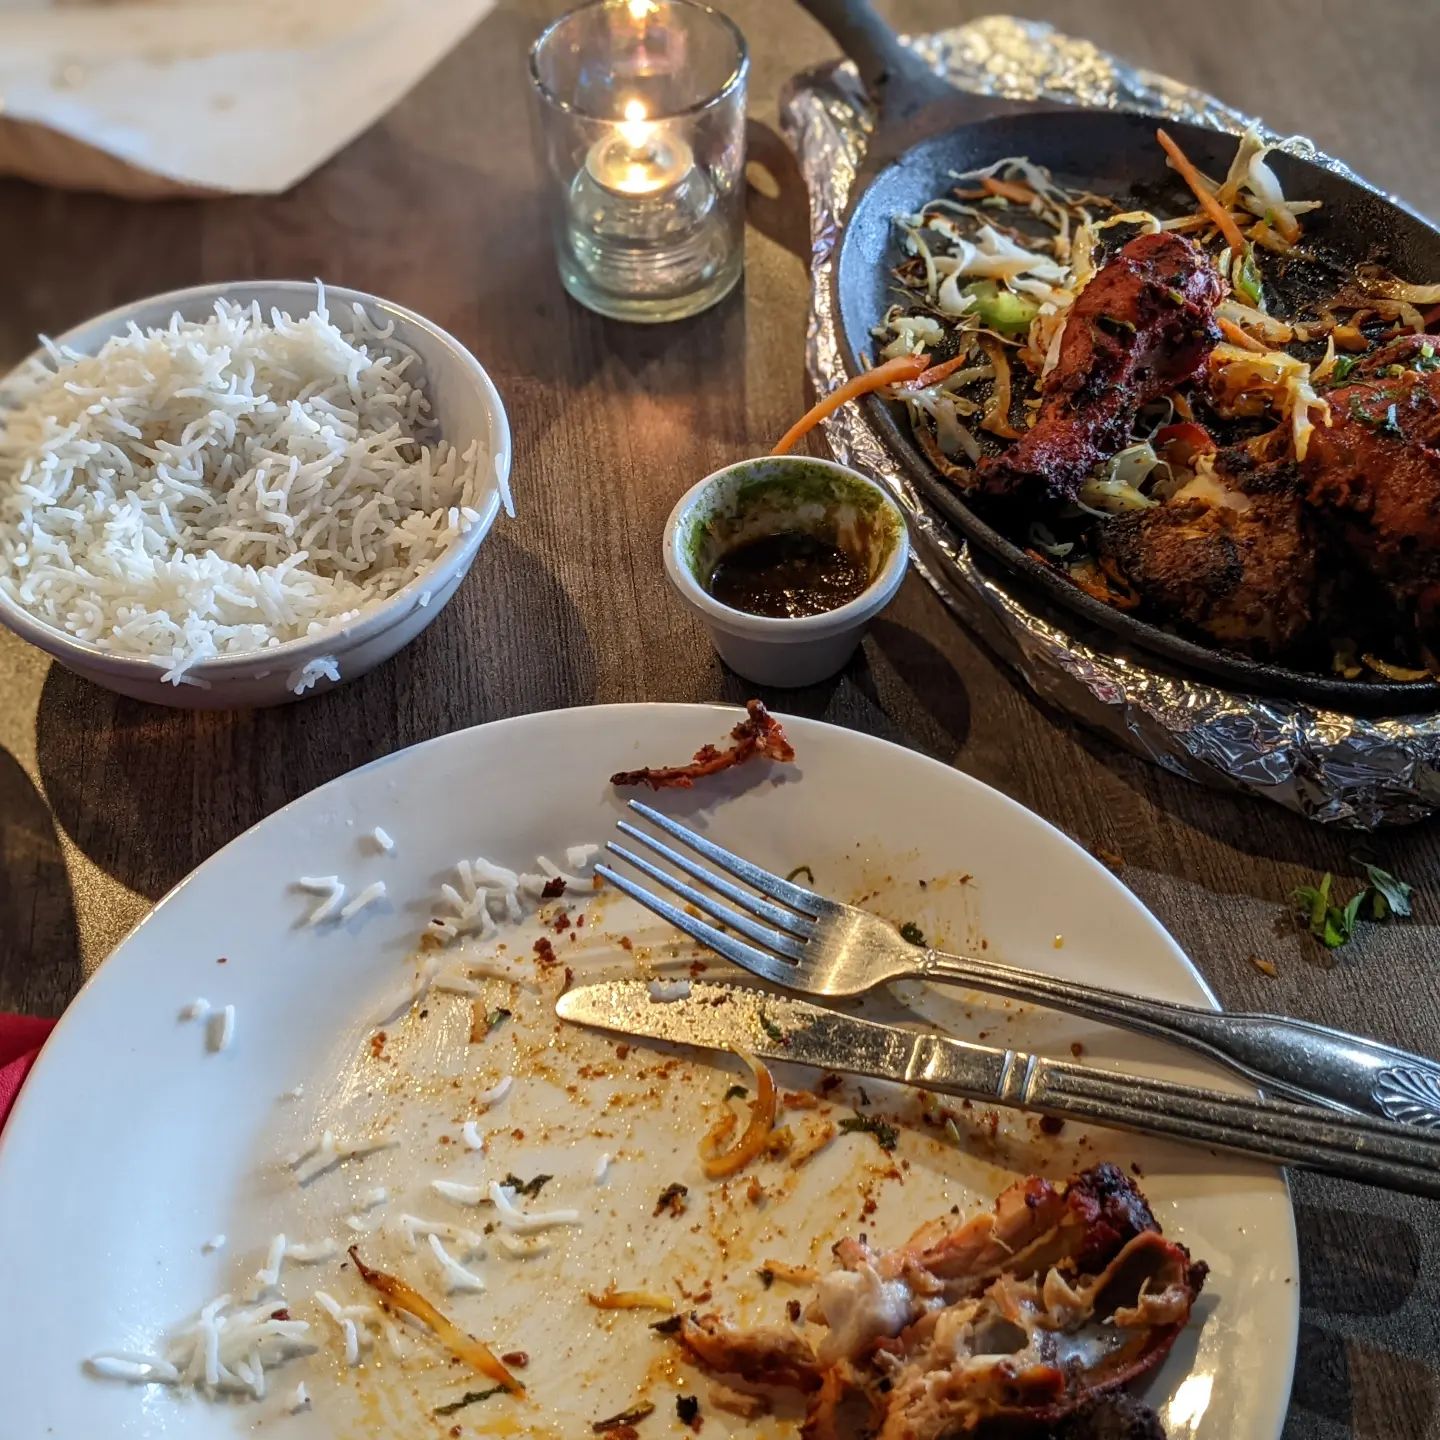 I demolished as much of the tandoori chicken and lamb as I could but yeah... Lunch tomorrow!! #foodporn #detroit